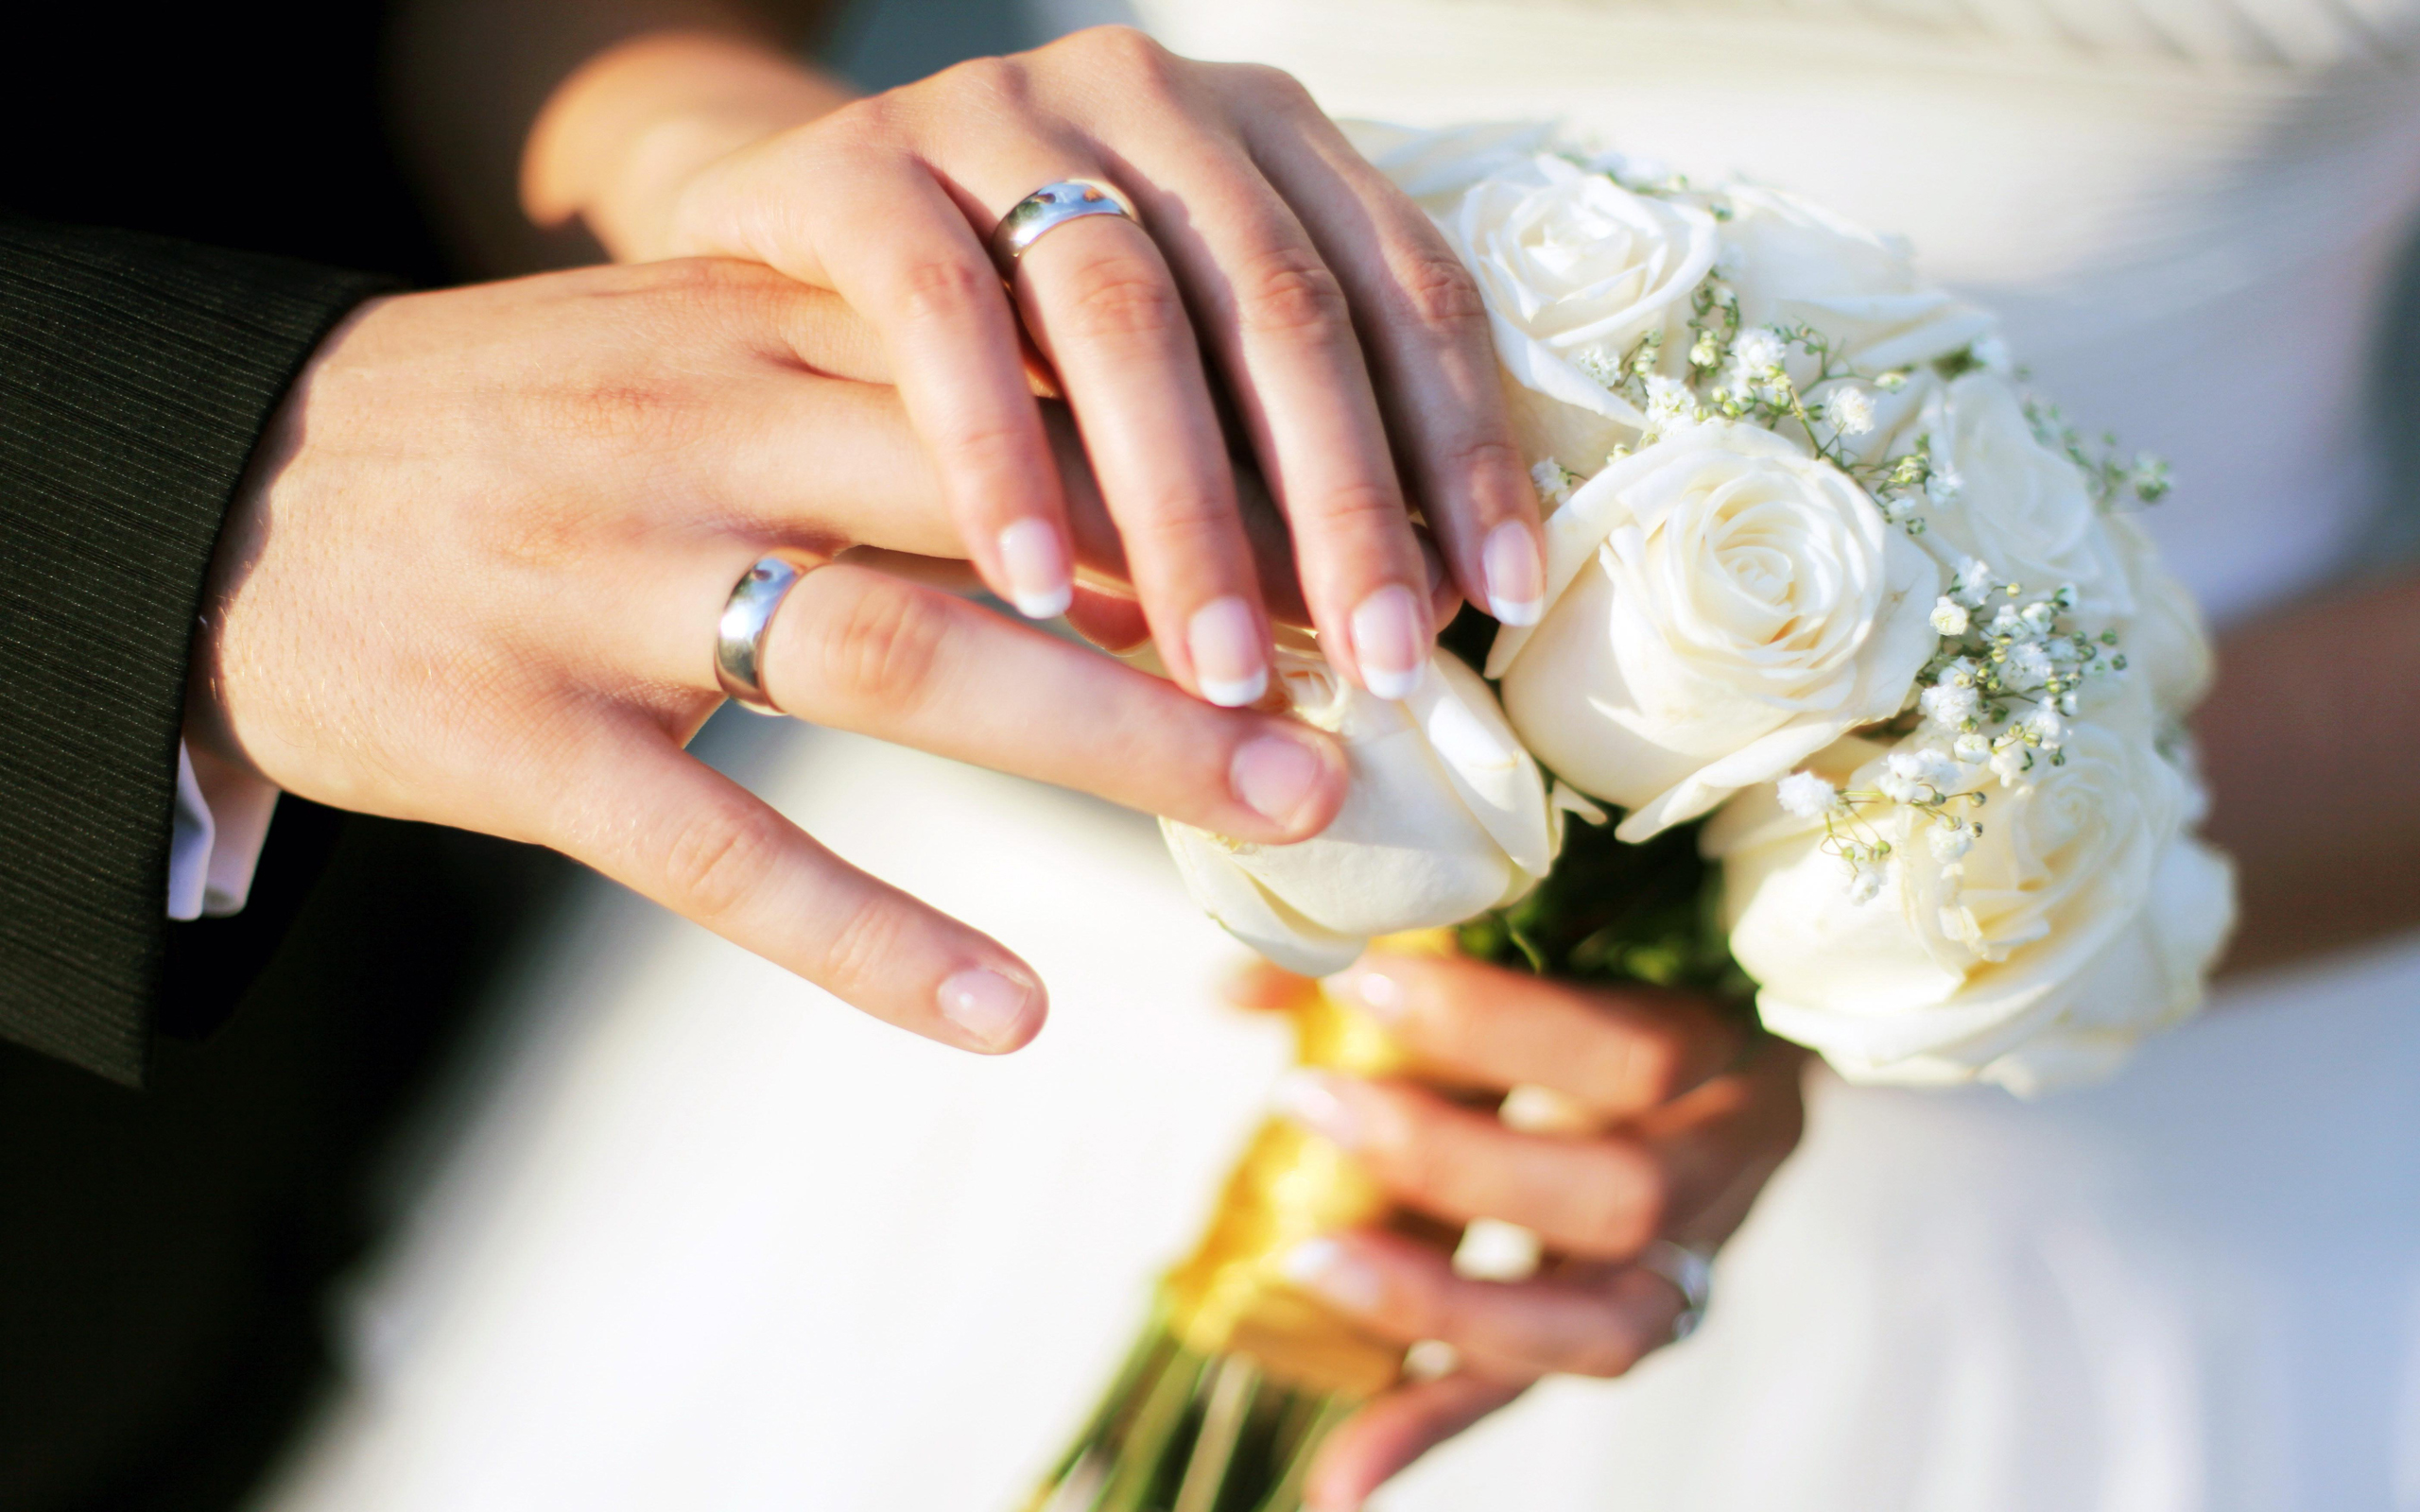 Wedding Pictures Of Hands With Rings - HD Wallpaper 